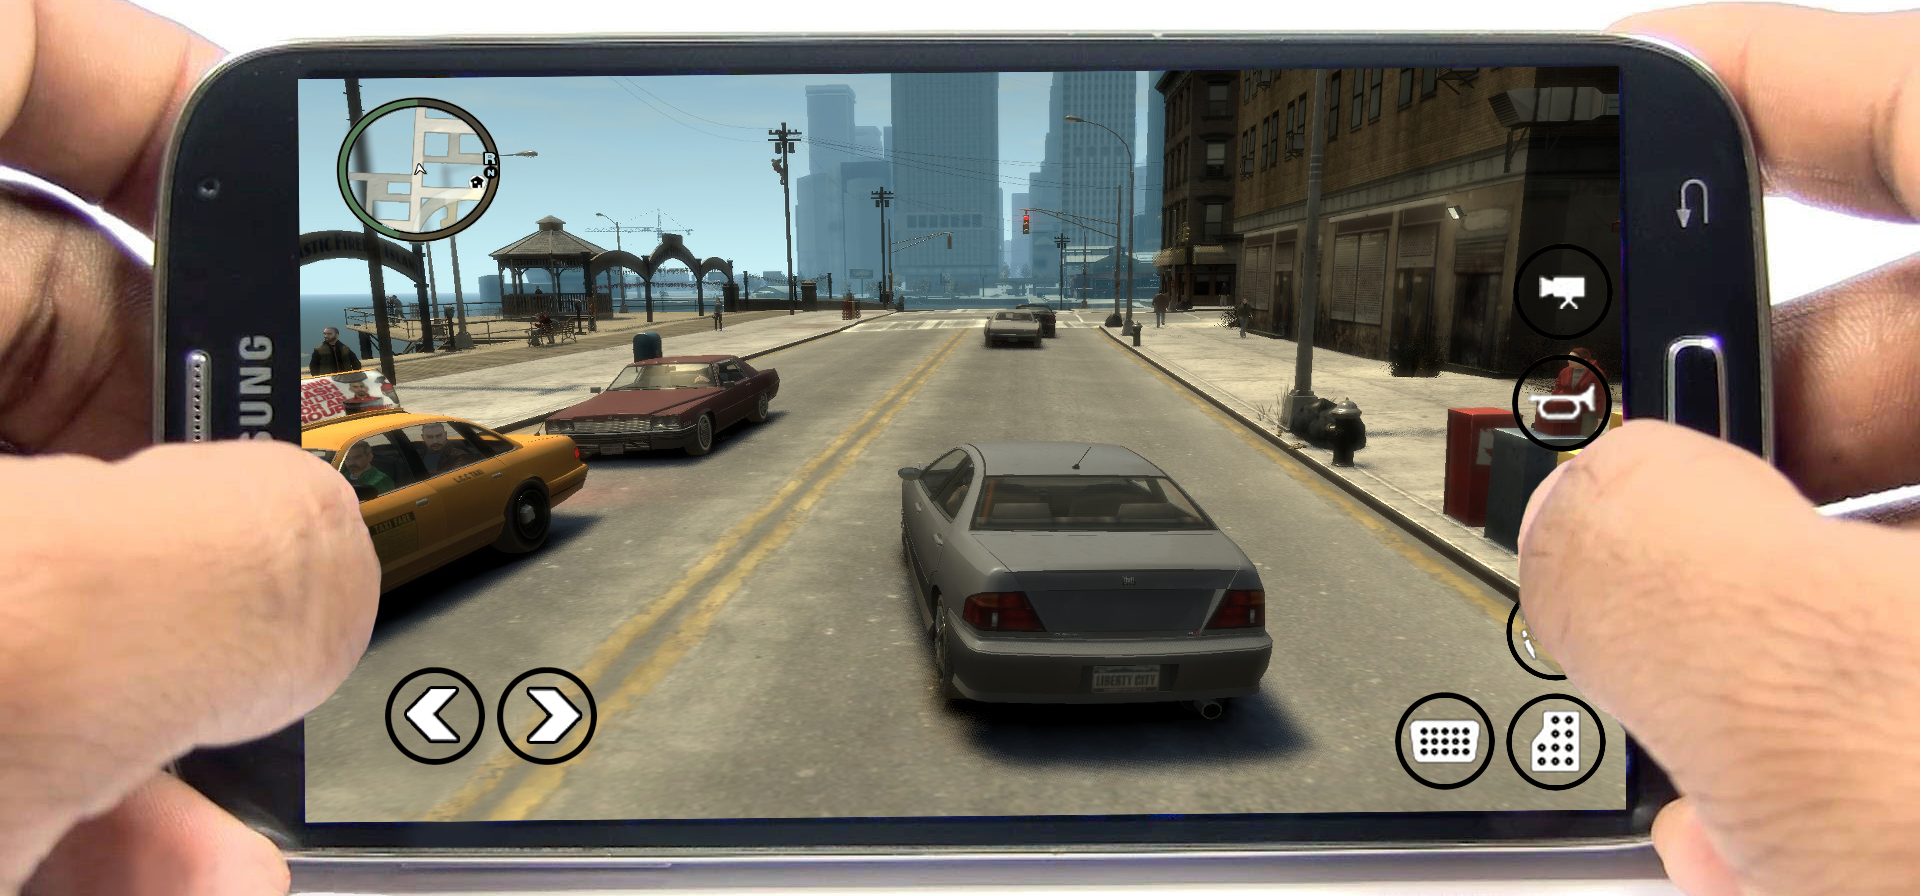 download gta v data zip file for android